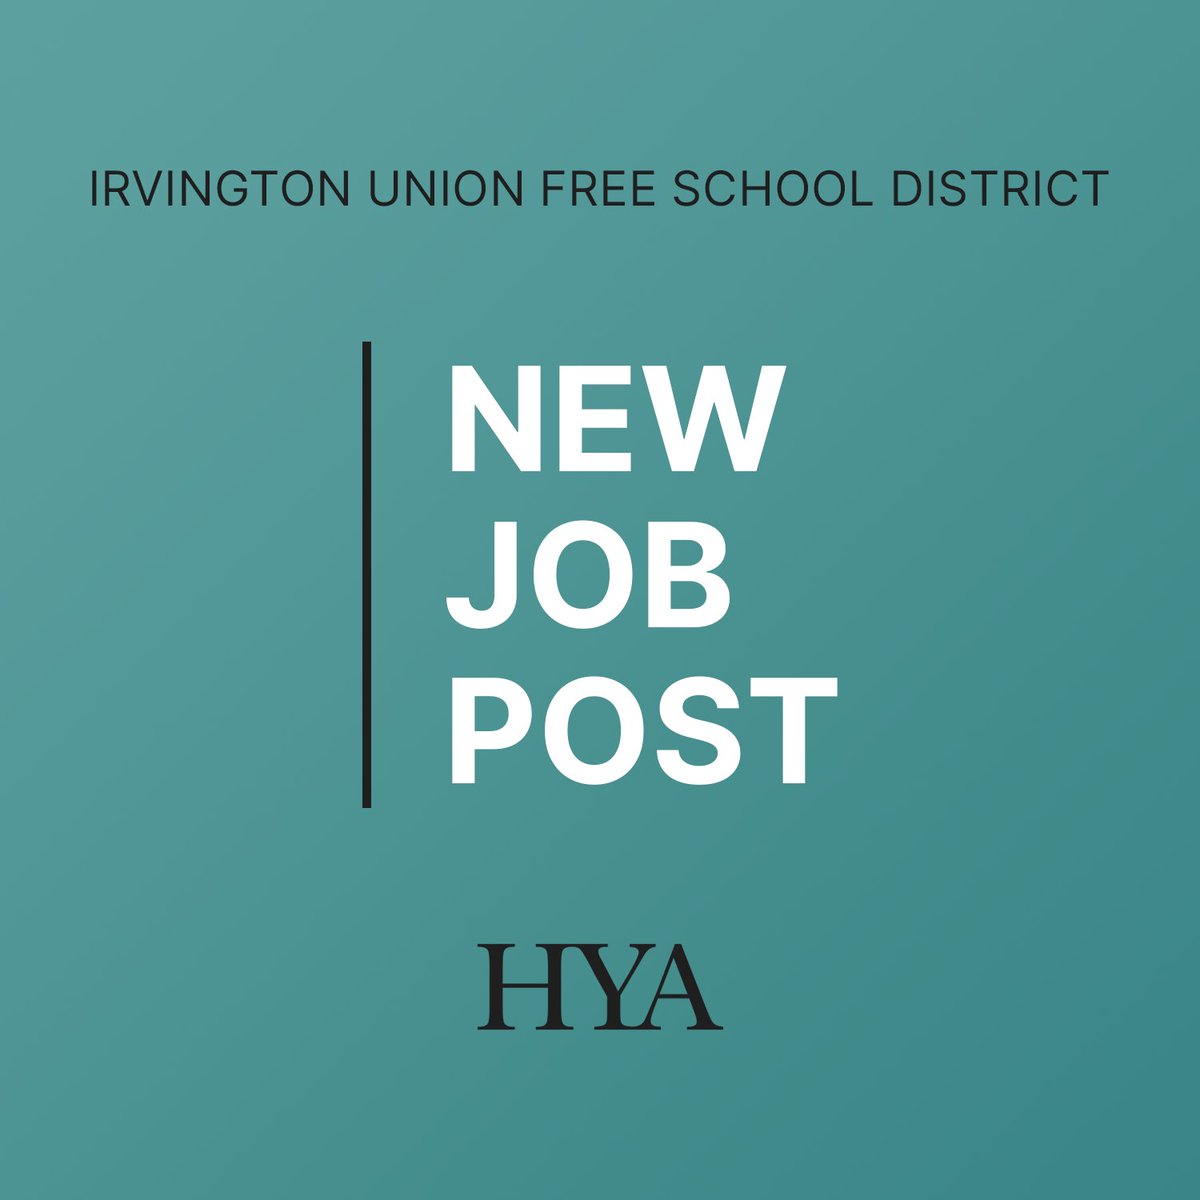 Start your application ASAP. Position is open until filled. #Superintendent Irvington Union Free School District, NY bit.ly/3J2jHDl

#HYAsearch #Education #Jobs #EducationJobs #suptchat #edleadership #edadmin